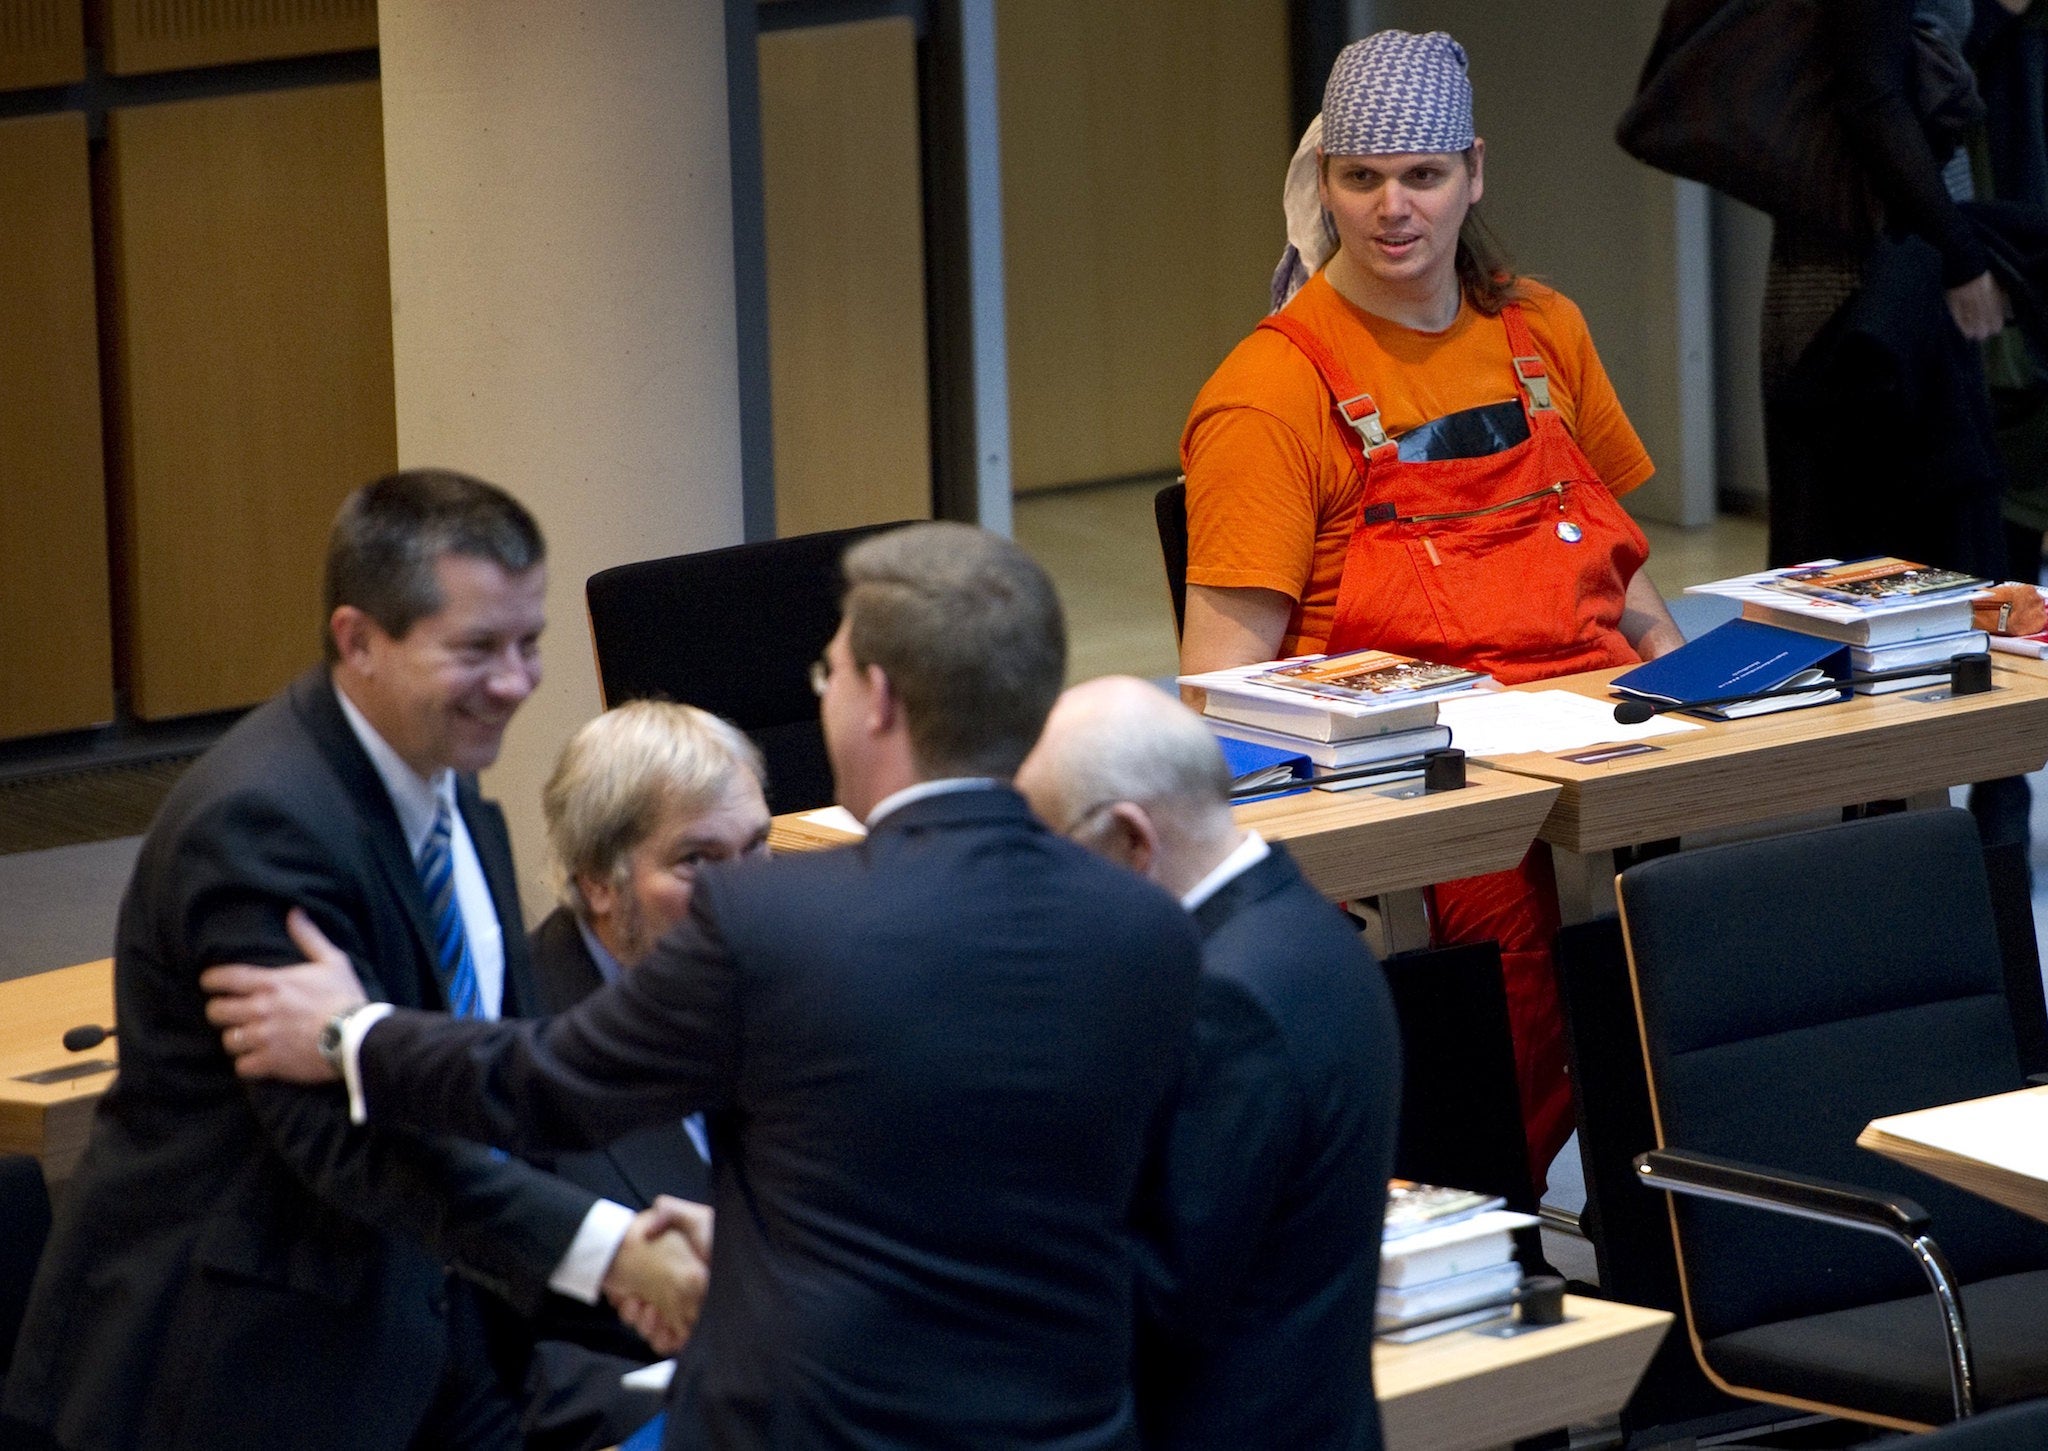 Mr Claus-Brunner (R) watches colleagues from other parties greet each other prior to the first sitting of the Berlin parliament on October 27, 2011. He stood out for his appearance in parliament and was at times a controversial figure